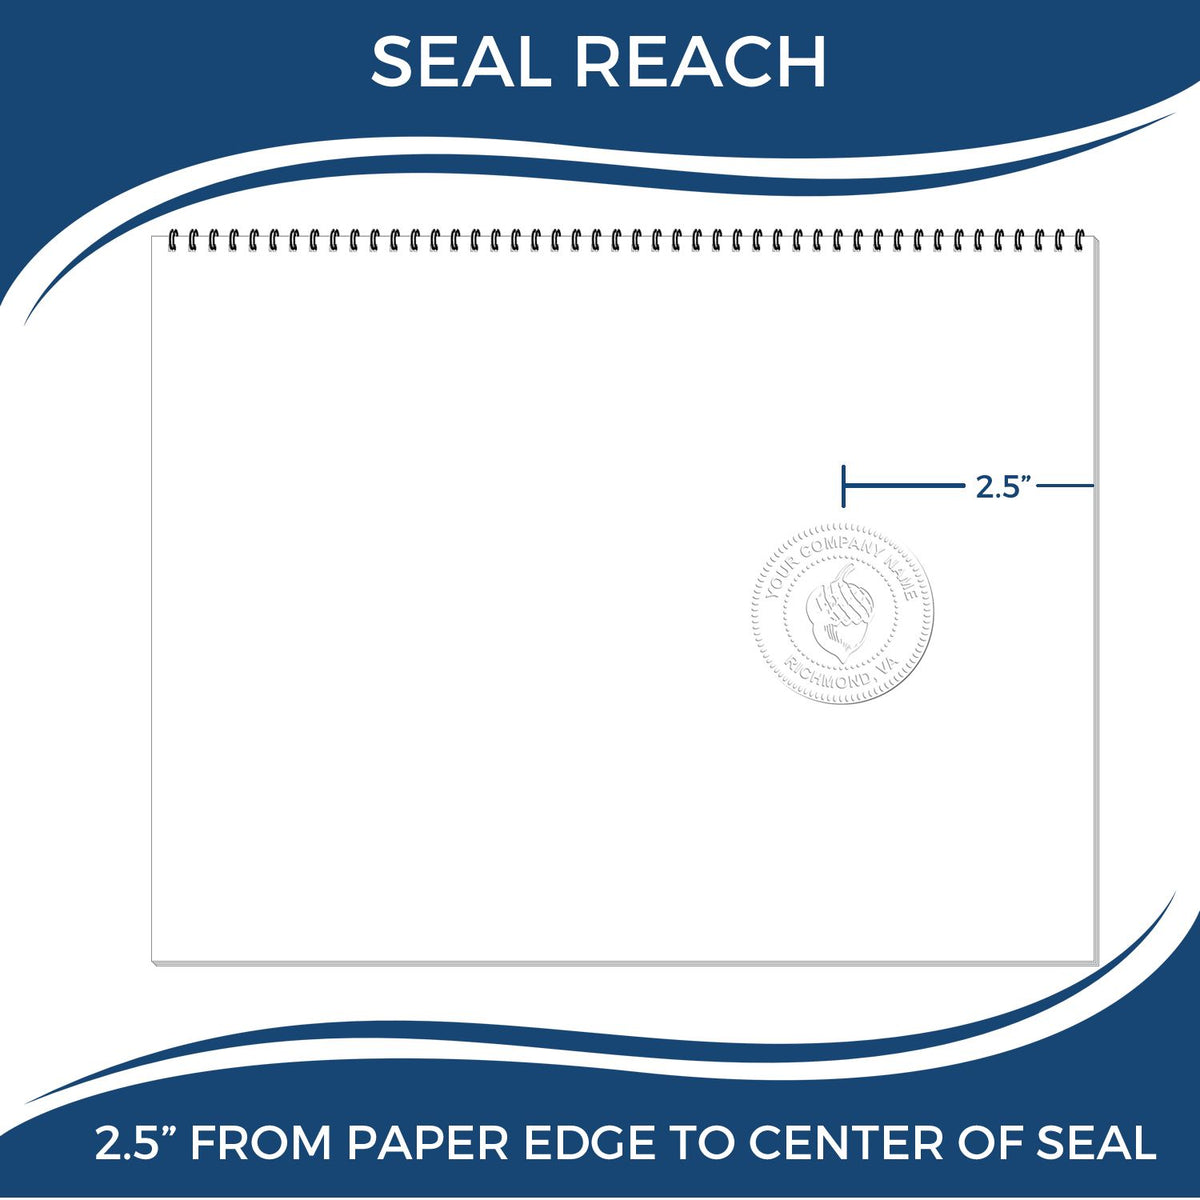 An infographic showing the seal reach which is represented by a ruler and a miniature seal image of the State of Hawaii Long Reach Architectural Embossing Seal